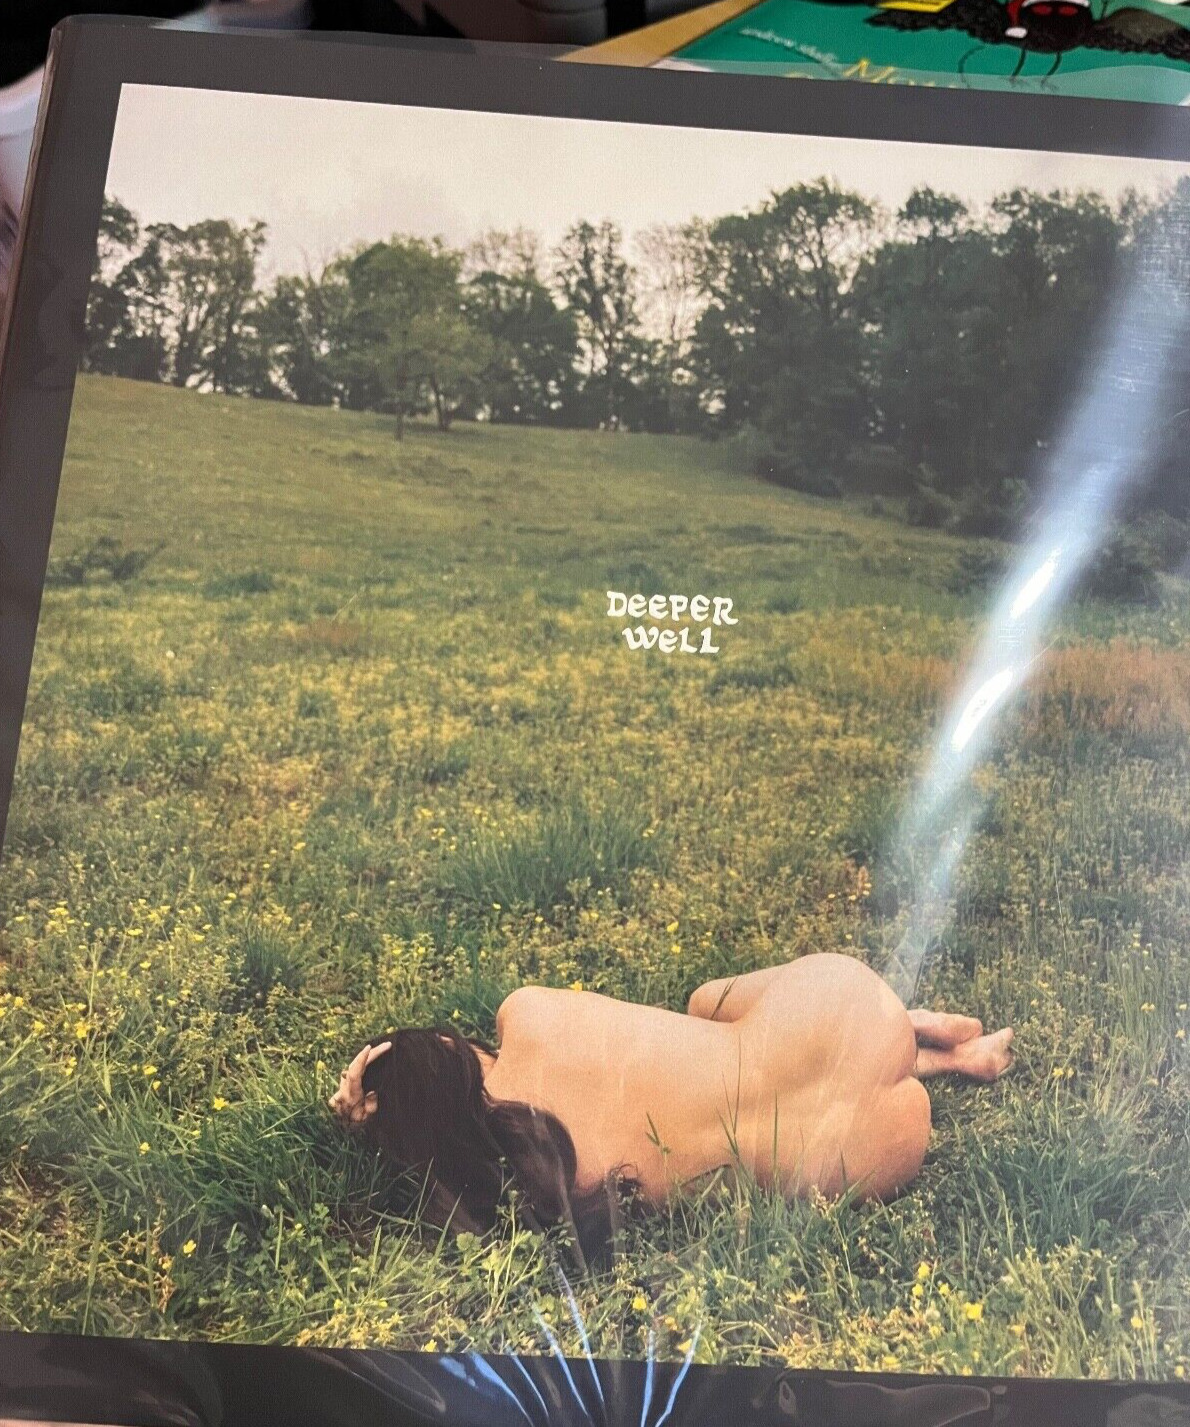 Kacey Musgraves - Deeper Well Transparent Cream Vinyl Nude Cover IN HAND